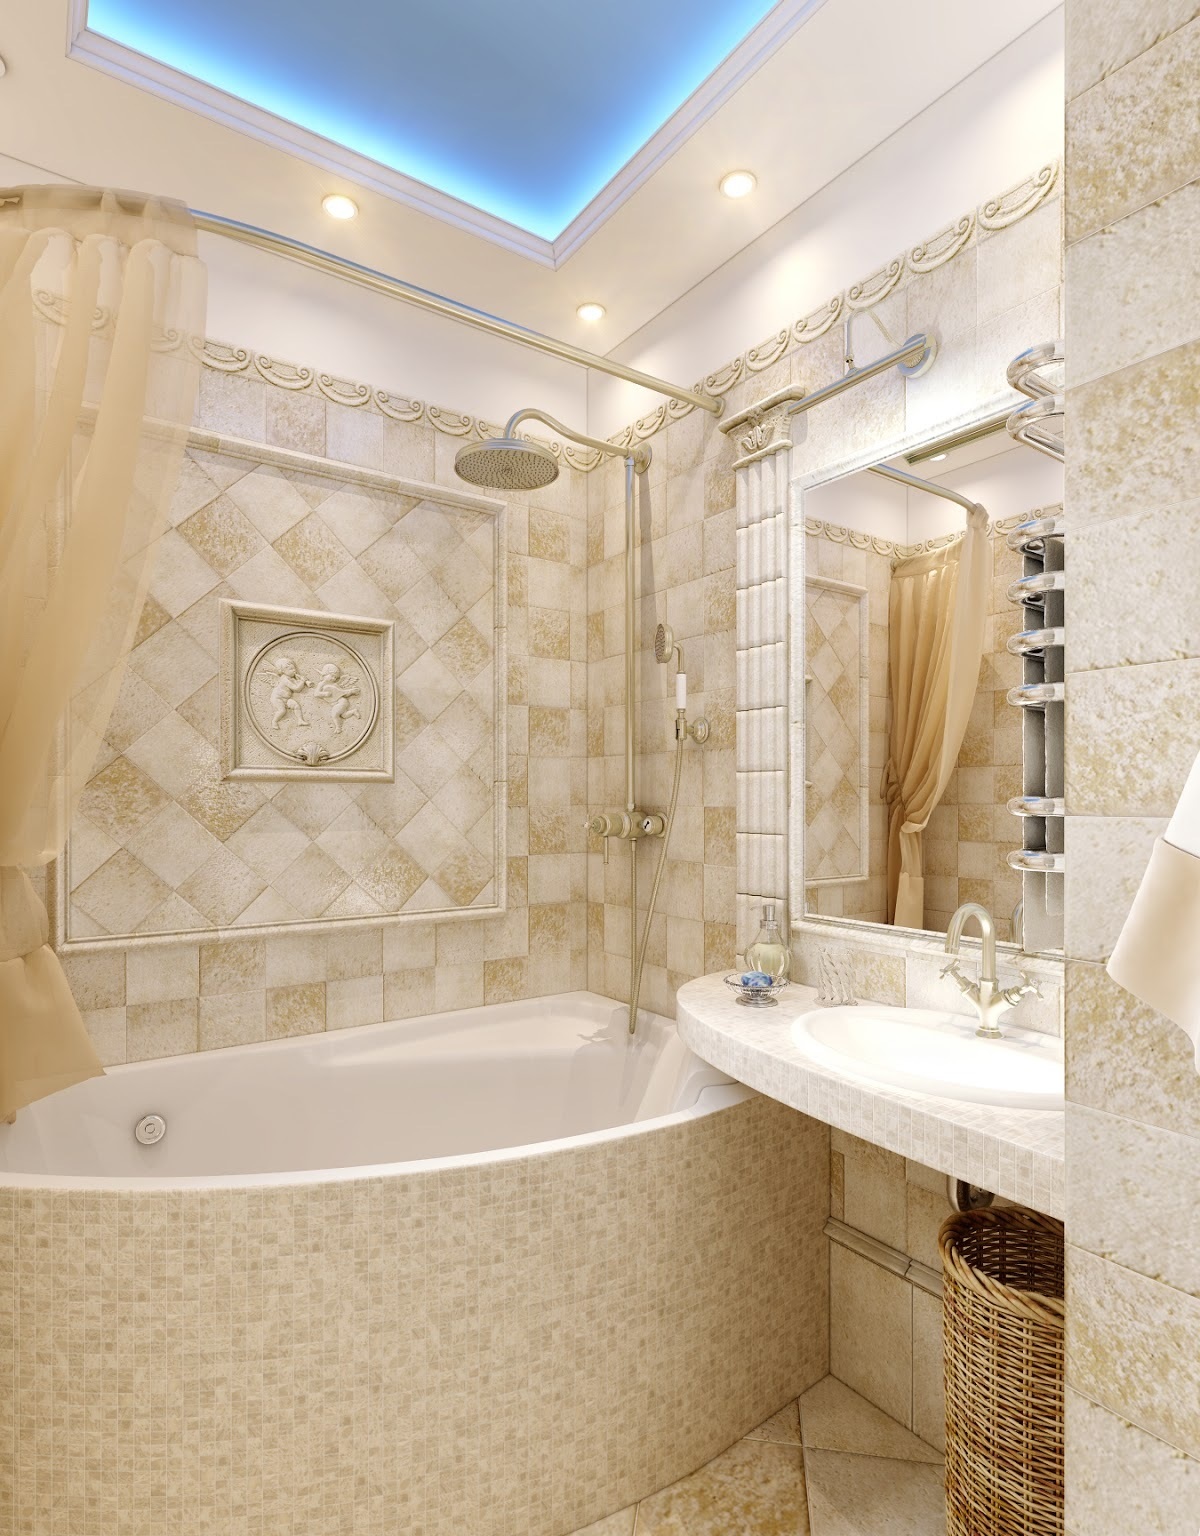 An example of a bright bathroom interior in beige color